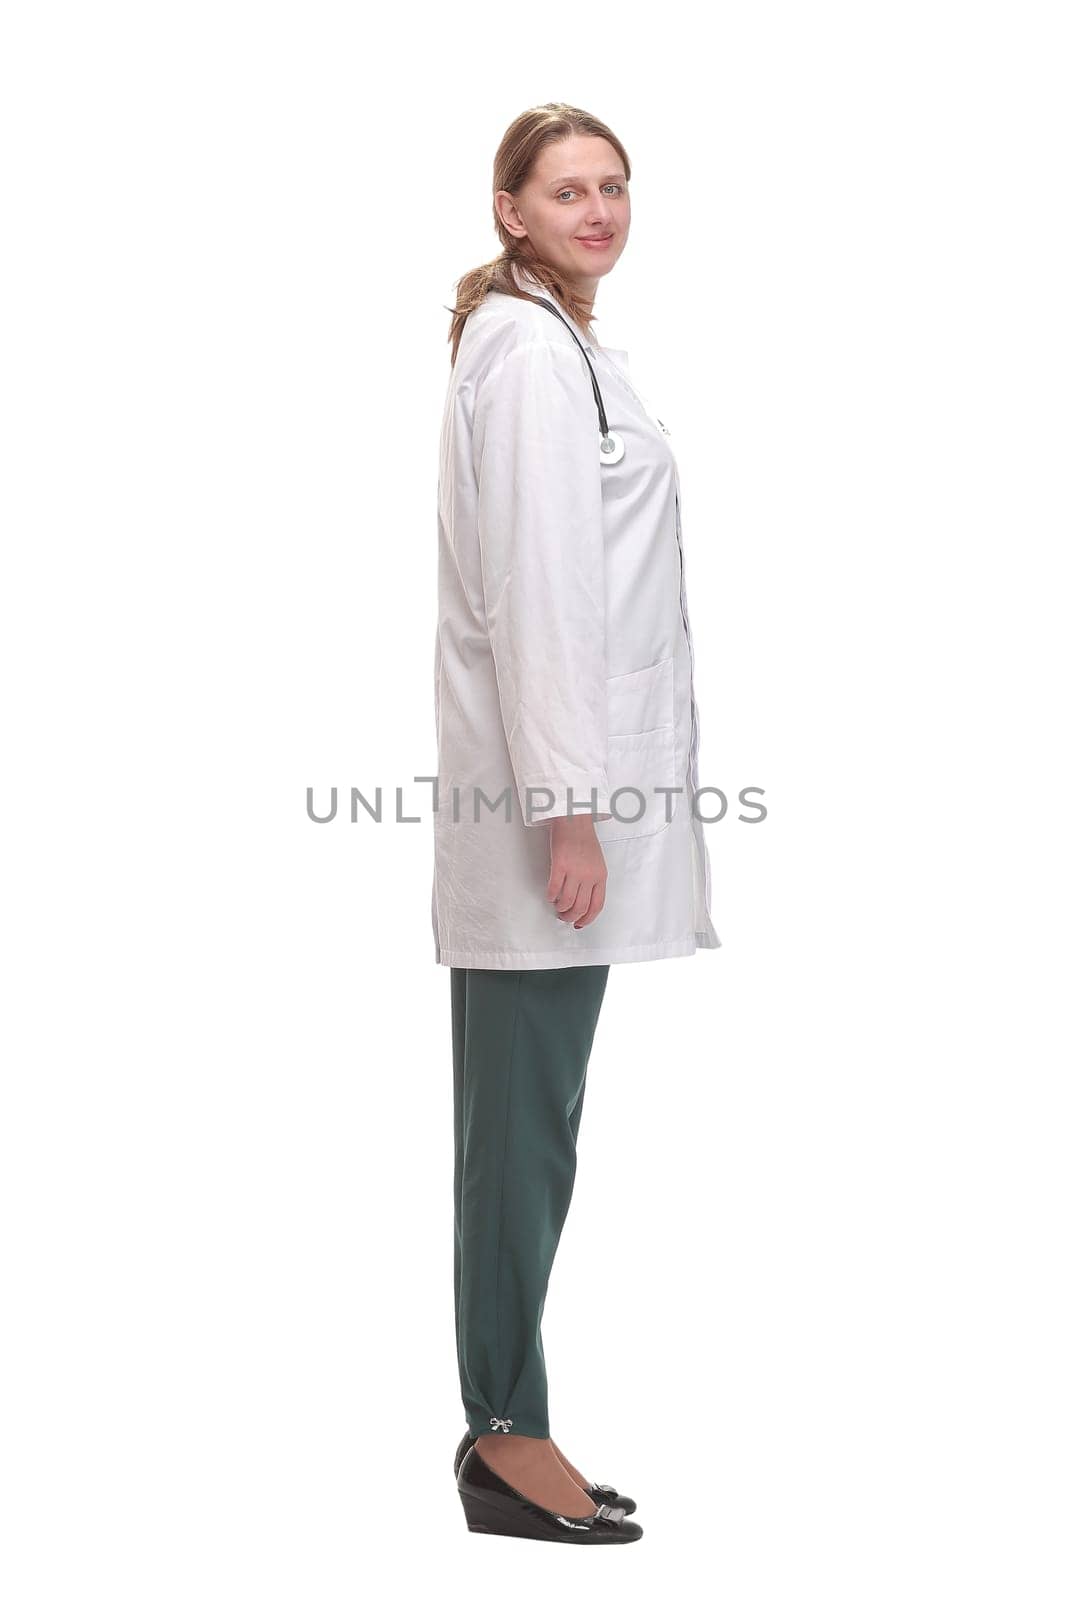 Side view of young female doctor or nurse standing over white background thoughtfully and looking forward.